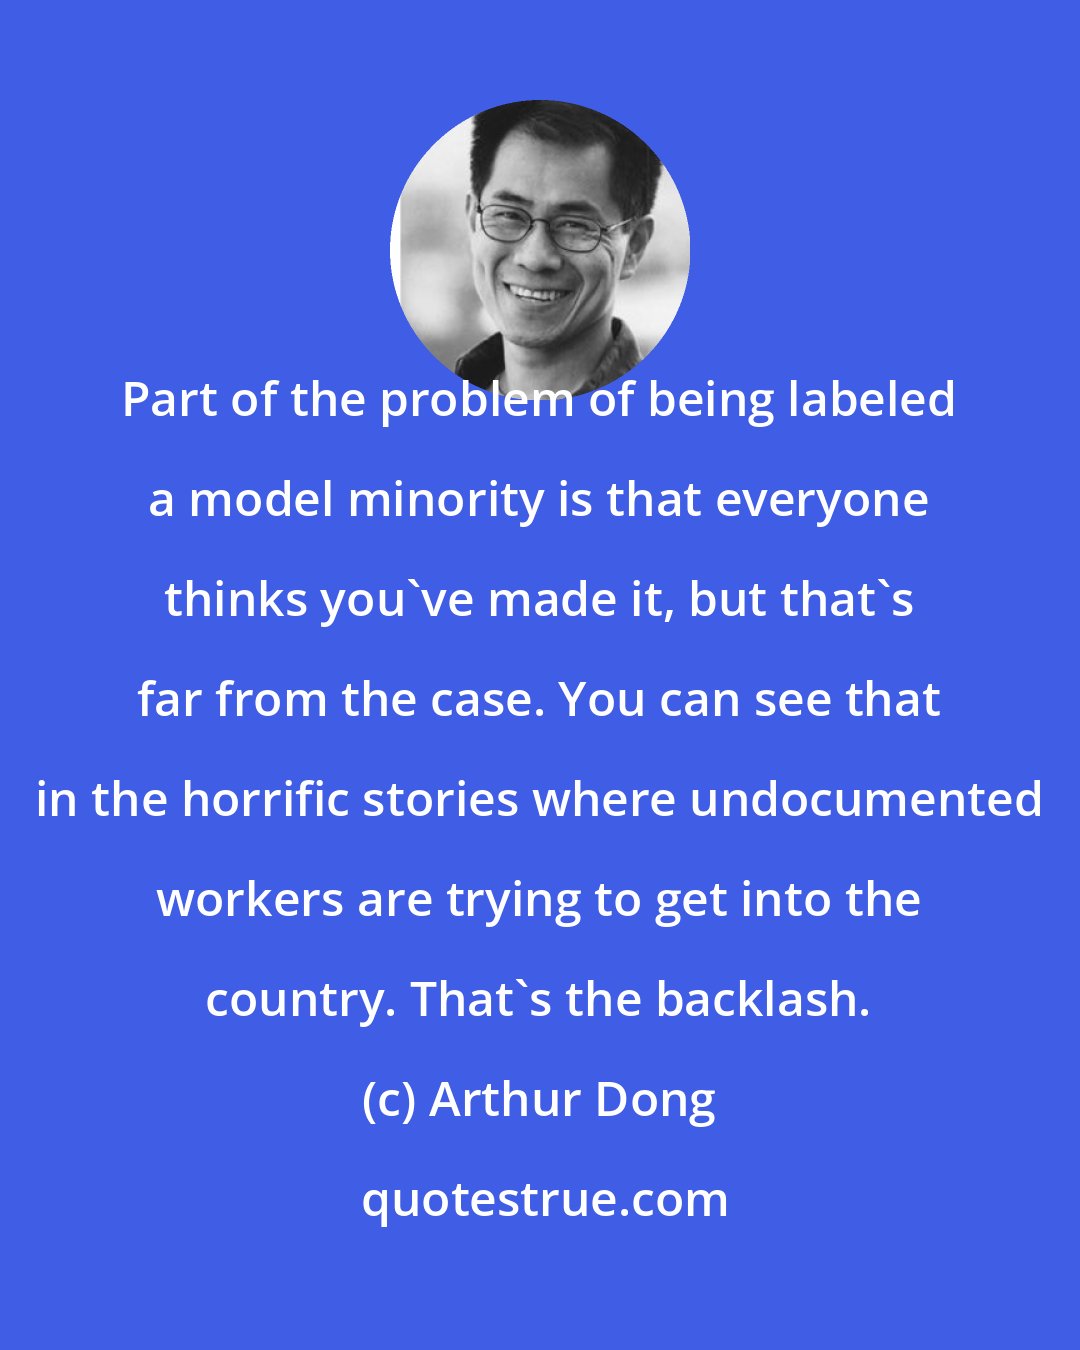 Arthur Dong: Part of the problem of being labeled a model minority is that everyone thinks you've made it, but that's far from the case. You can see that in the horrific stories where undocumented workers are trying to get into the country. That's the backlash.